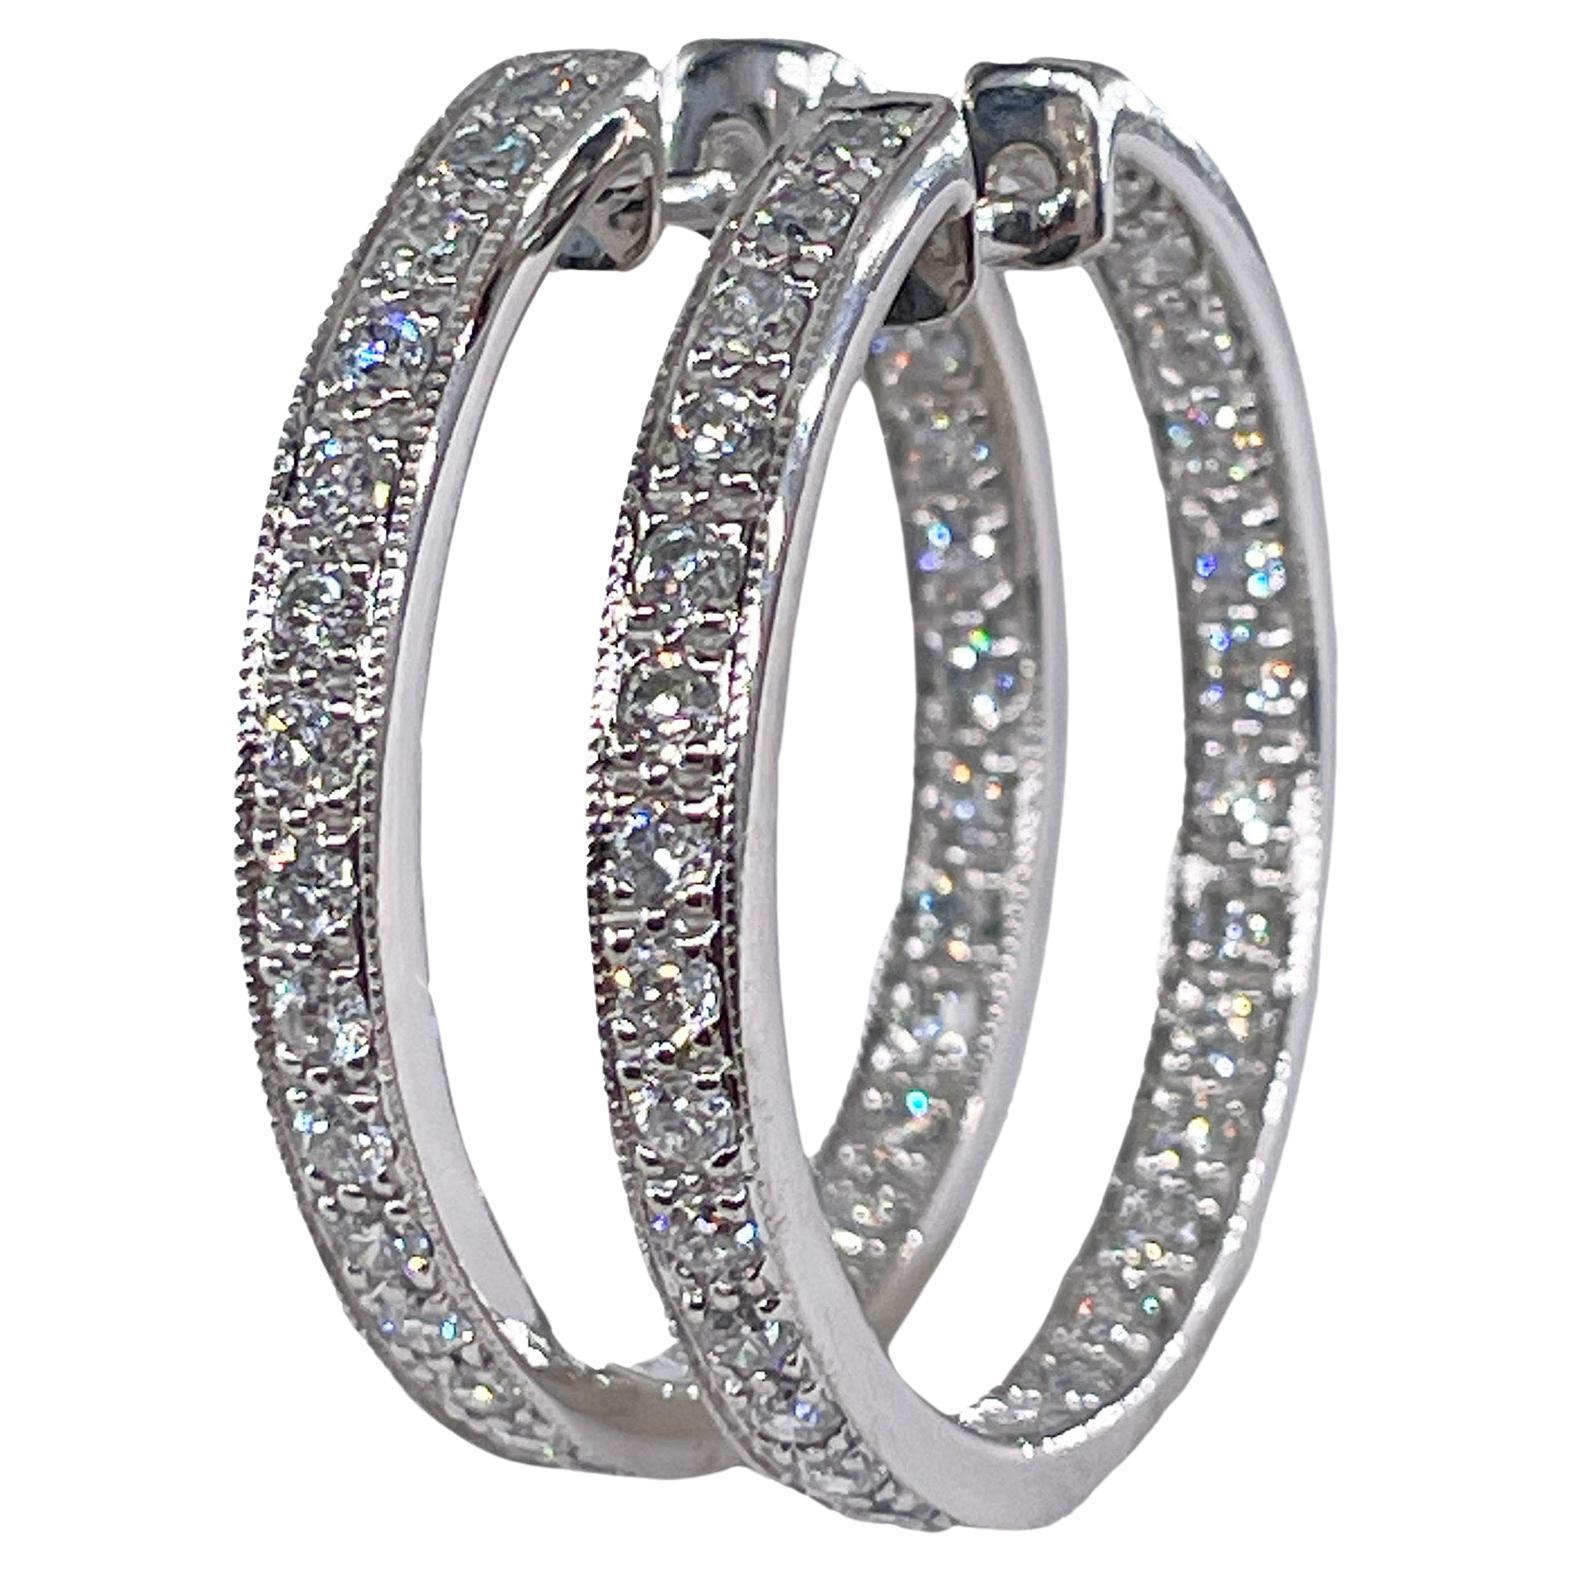 Inside Out Estate Round Pave 3.0ctw Diamond 14k White Gold 30mm Hoop Earrings